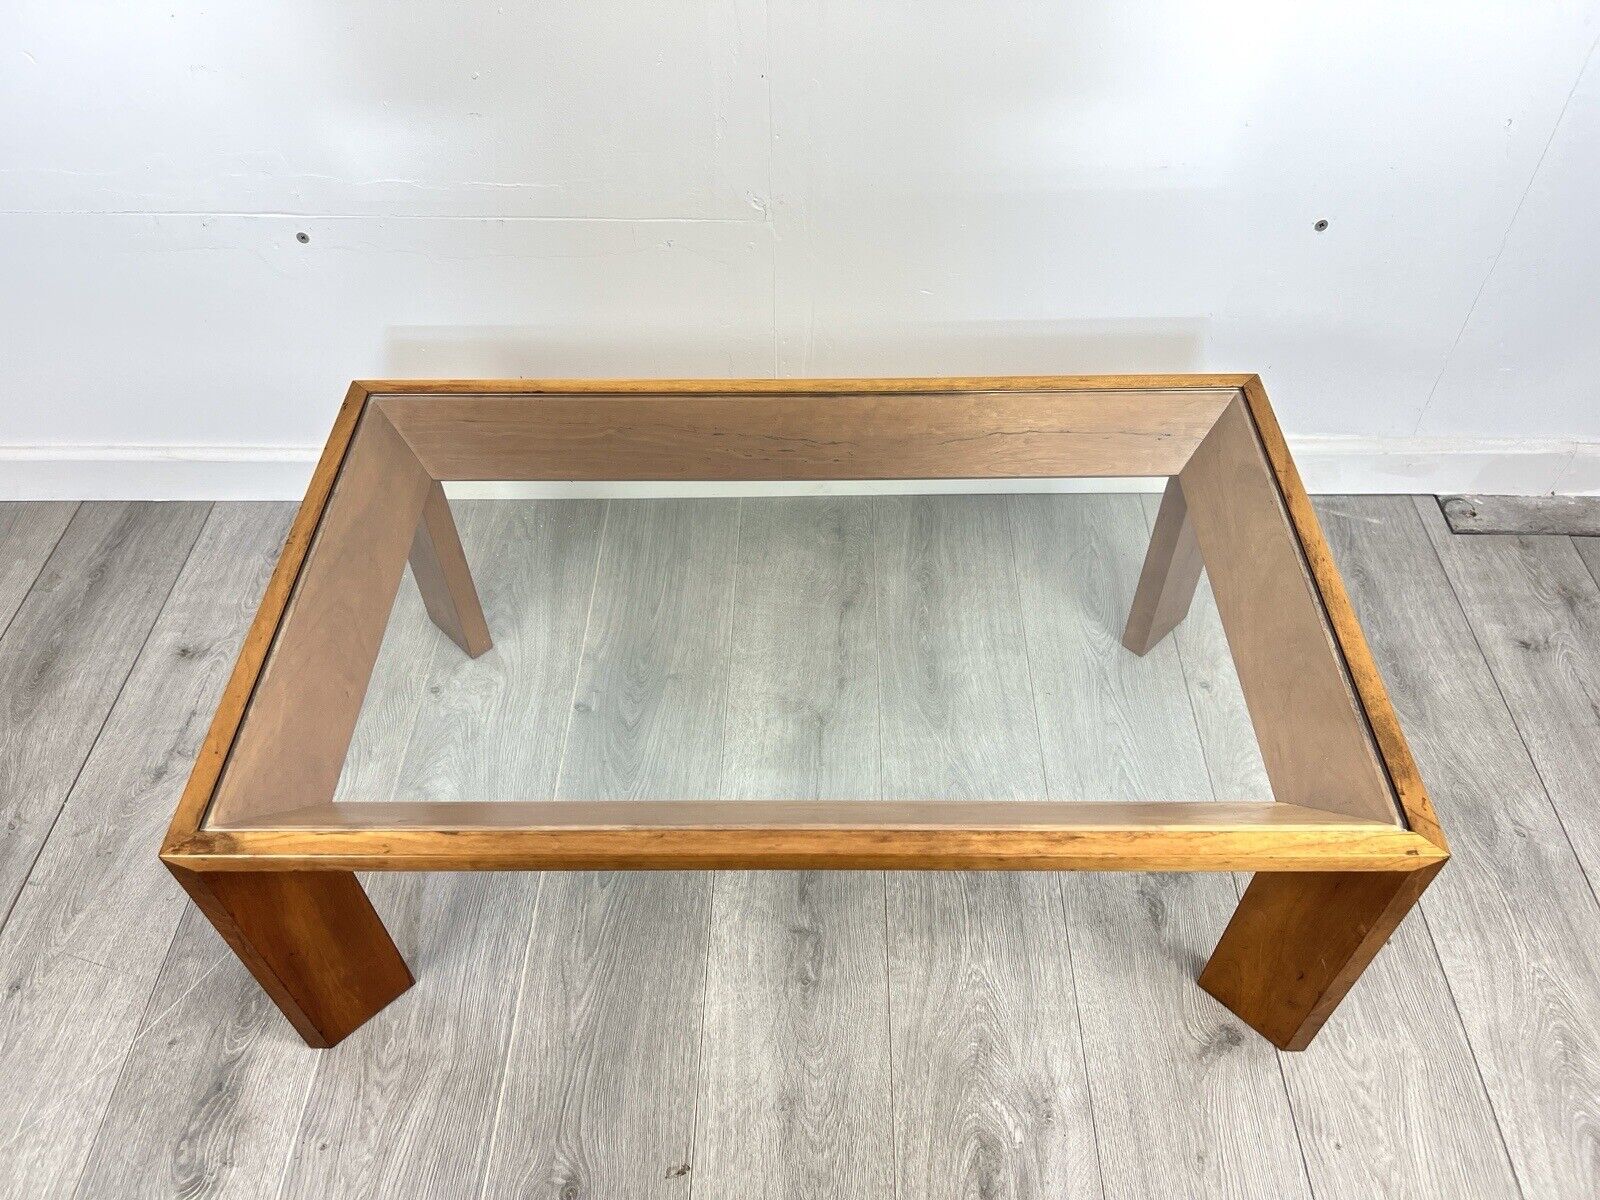 Vintage Cherry Wood and Glass Coffee Table